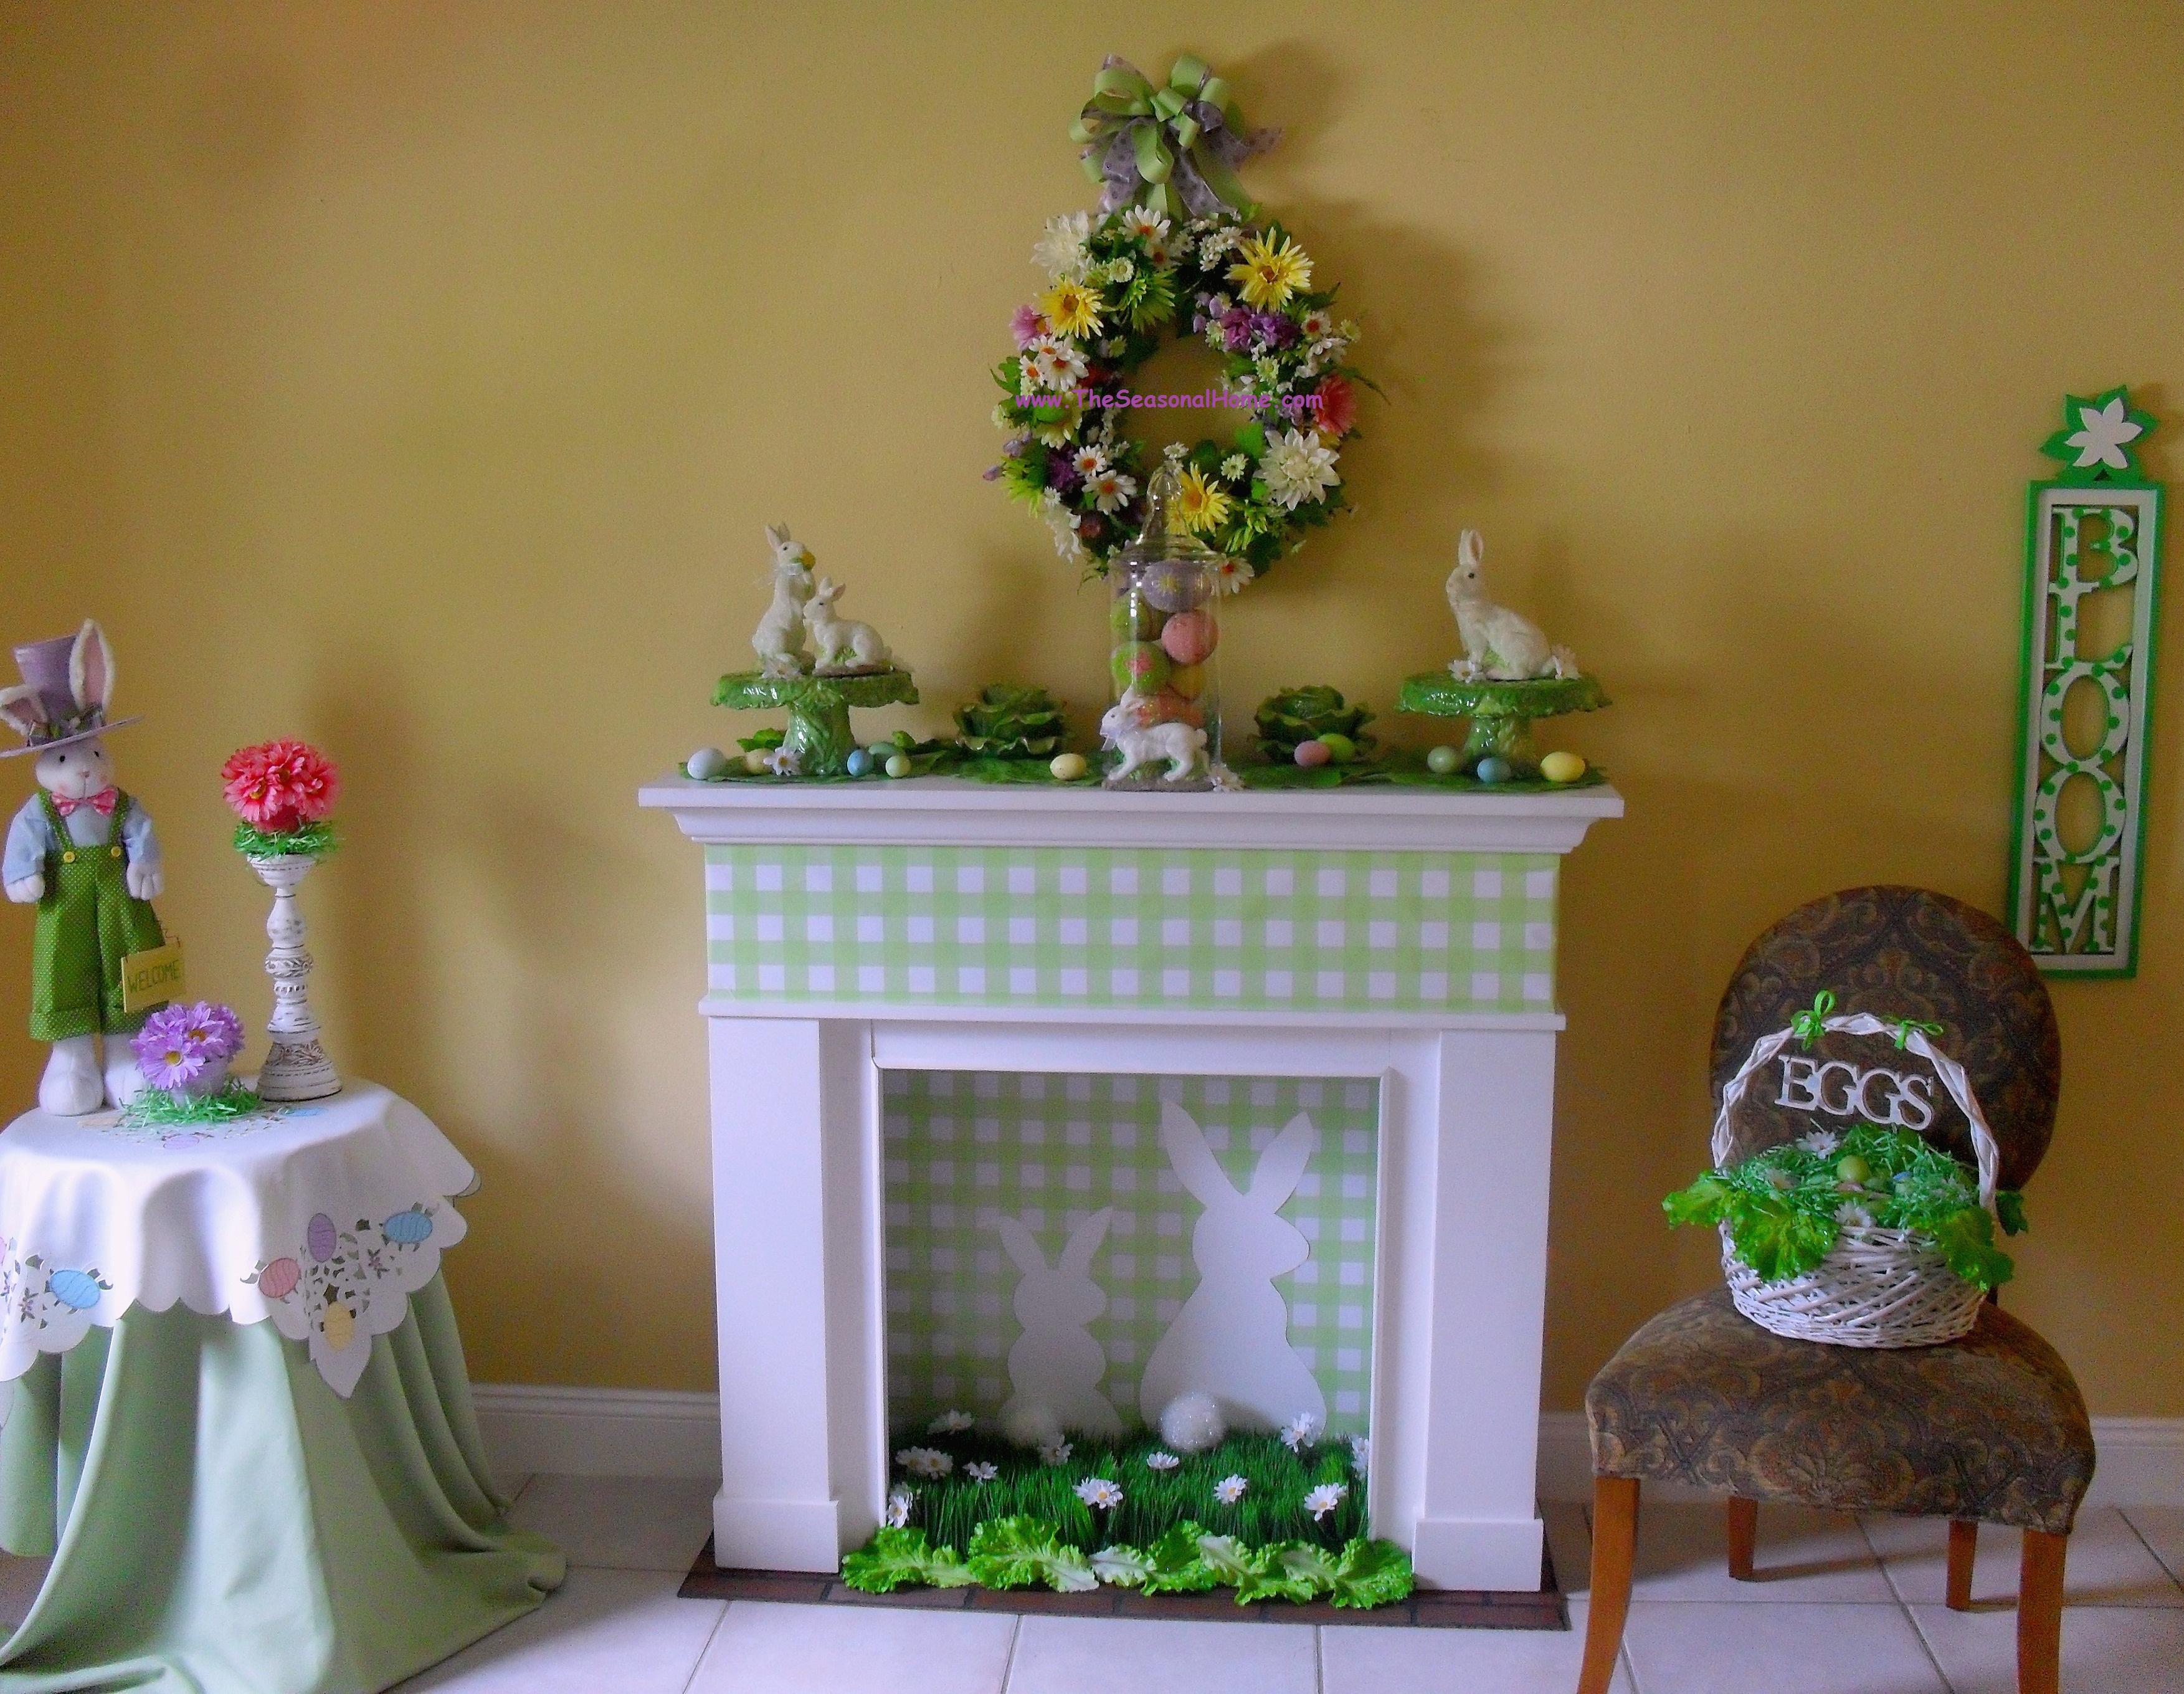 refreshing-mantel-easter-decorations-with-green-plaid-hallmark-wrap-56-artificial-green-grass-and-lettuce-leaves-white-bunnies-center-apothecary-jar-with-glittered-easter-eggs-and-yellow-and-white.